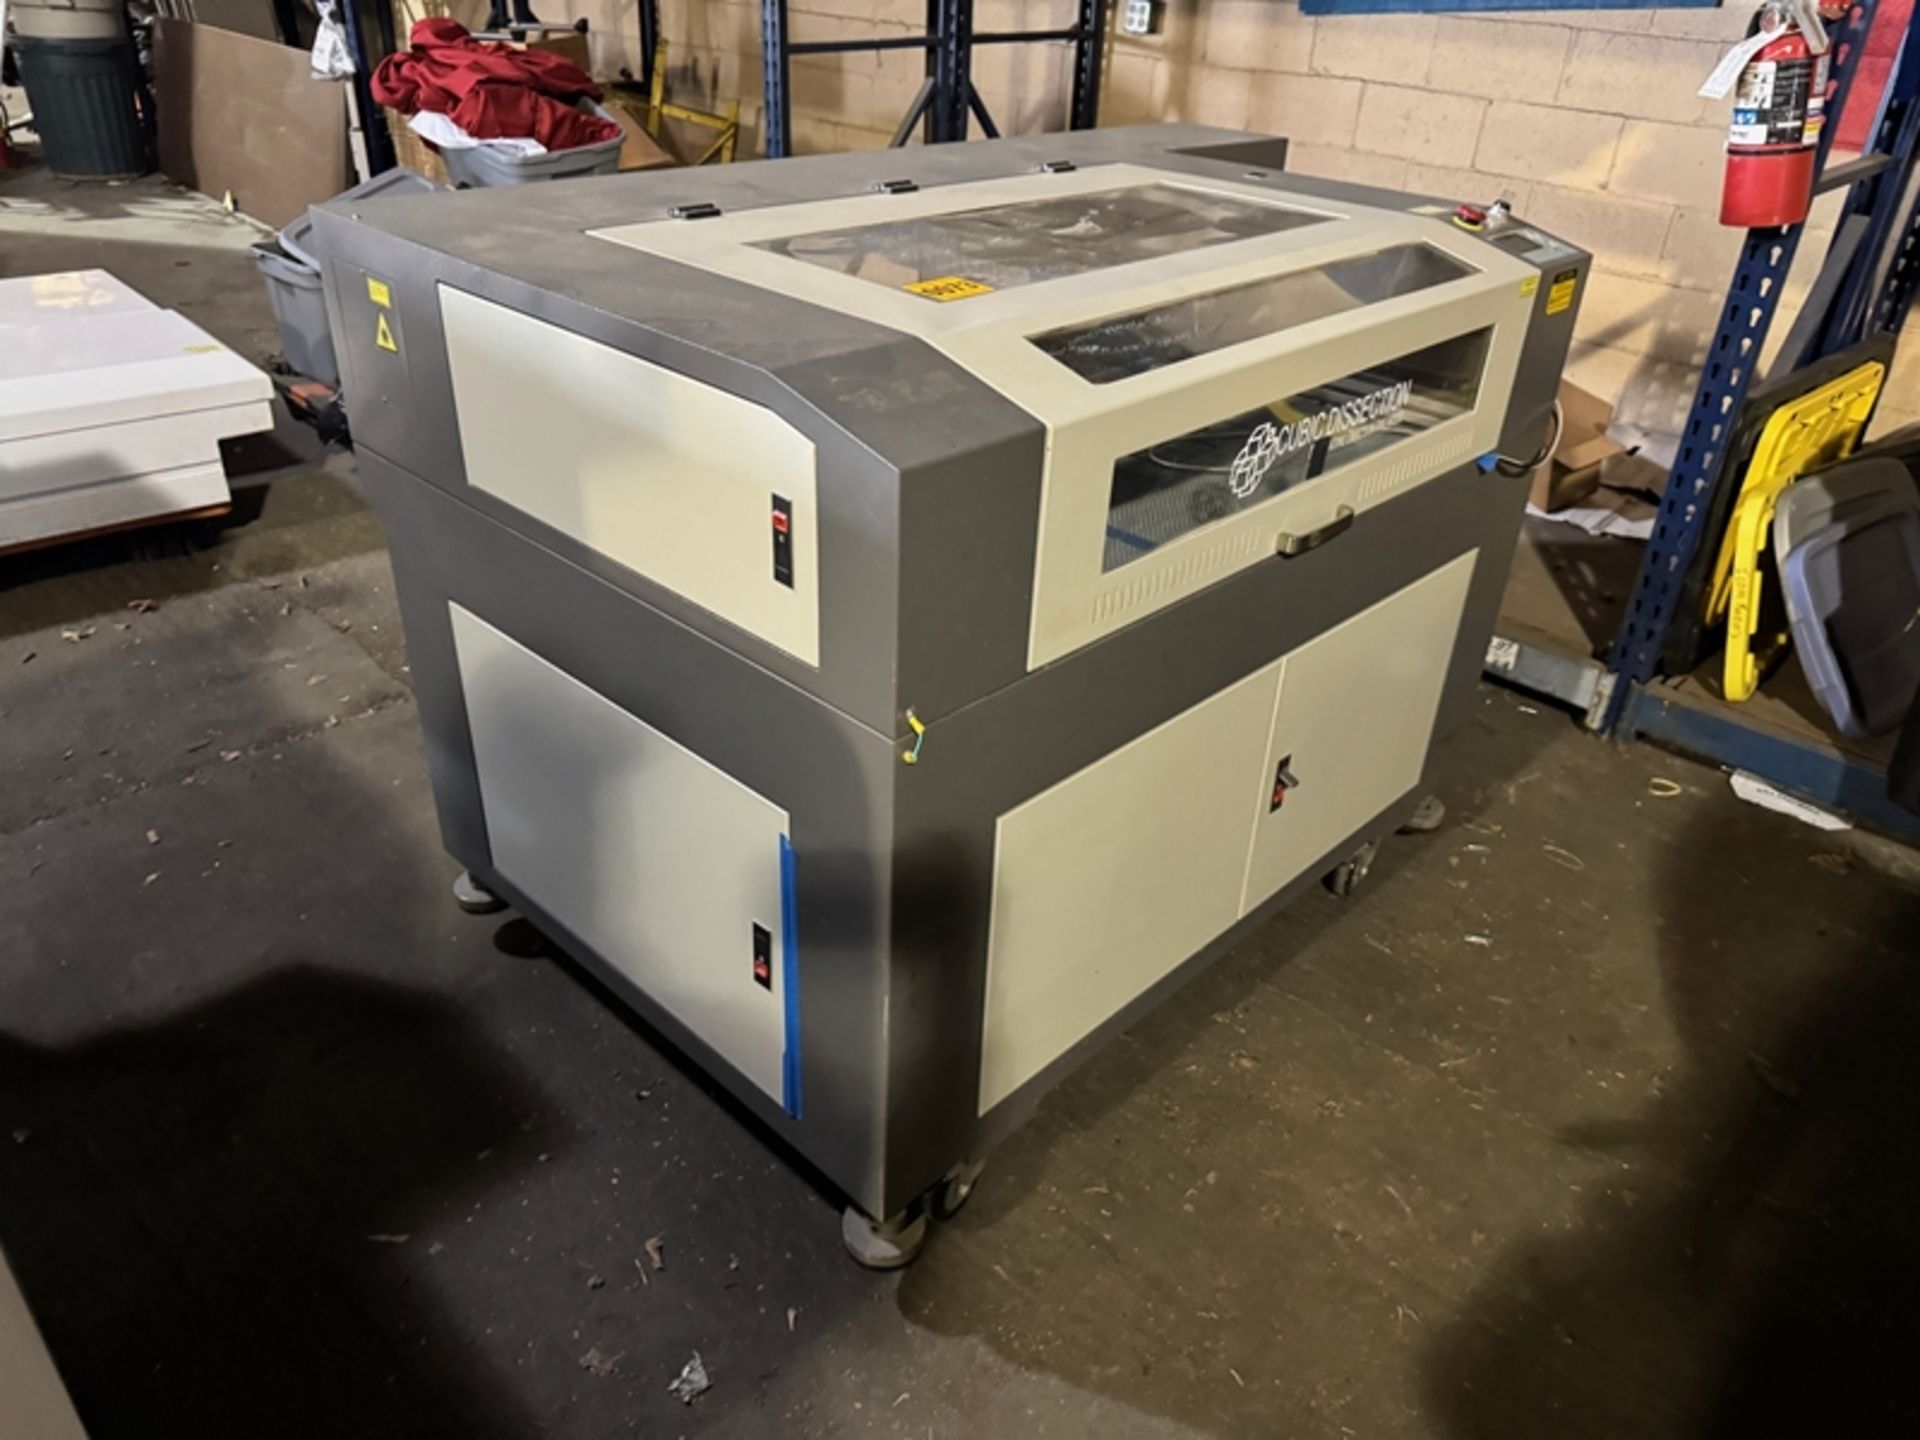 2008 JINAN Model LC6090 laser engraving machine approximately 36" X 24" cutting surface area with